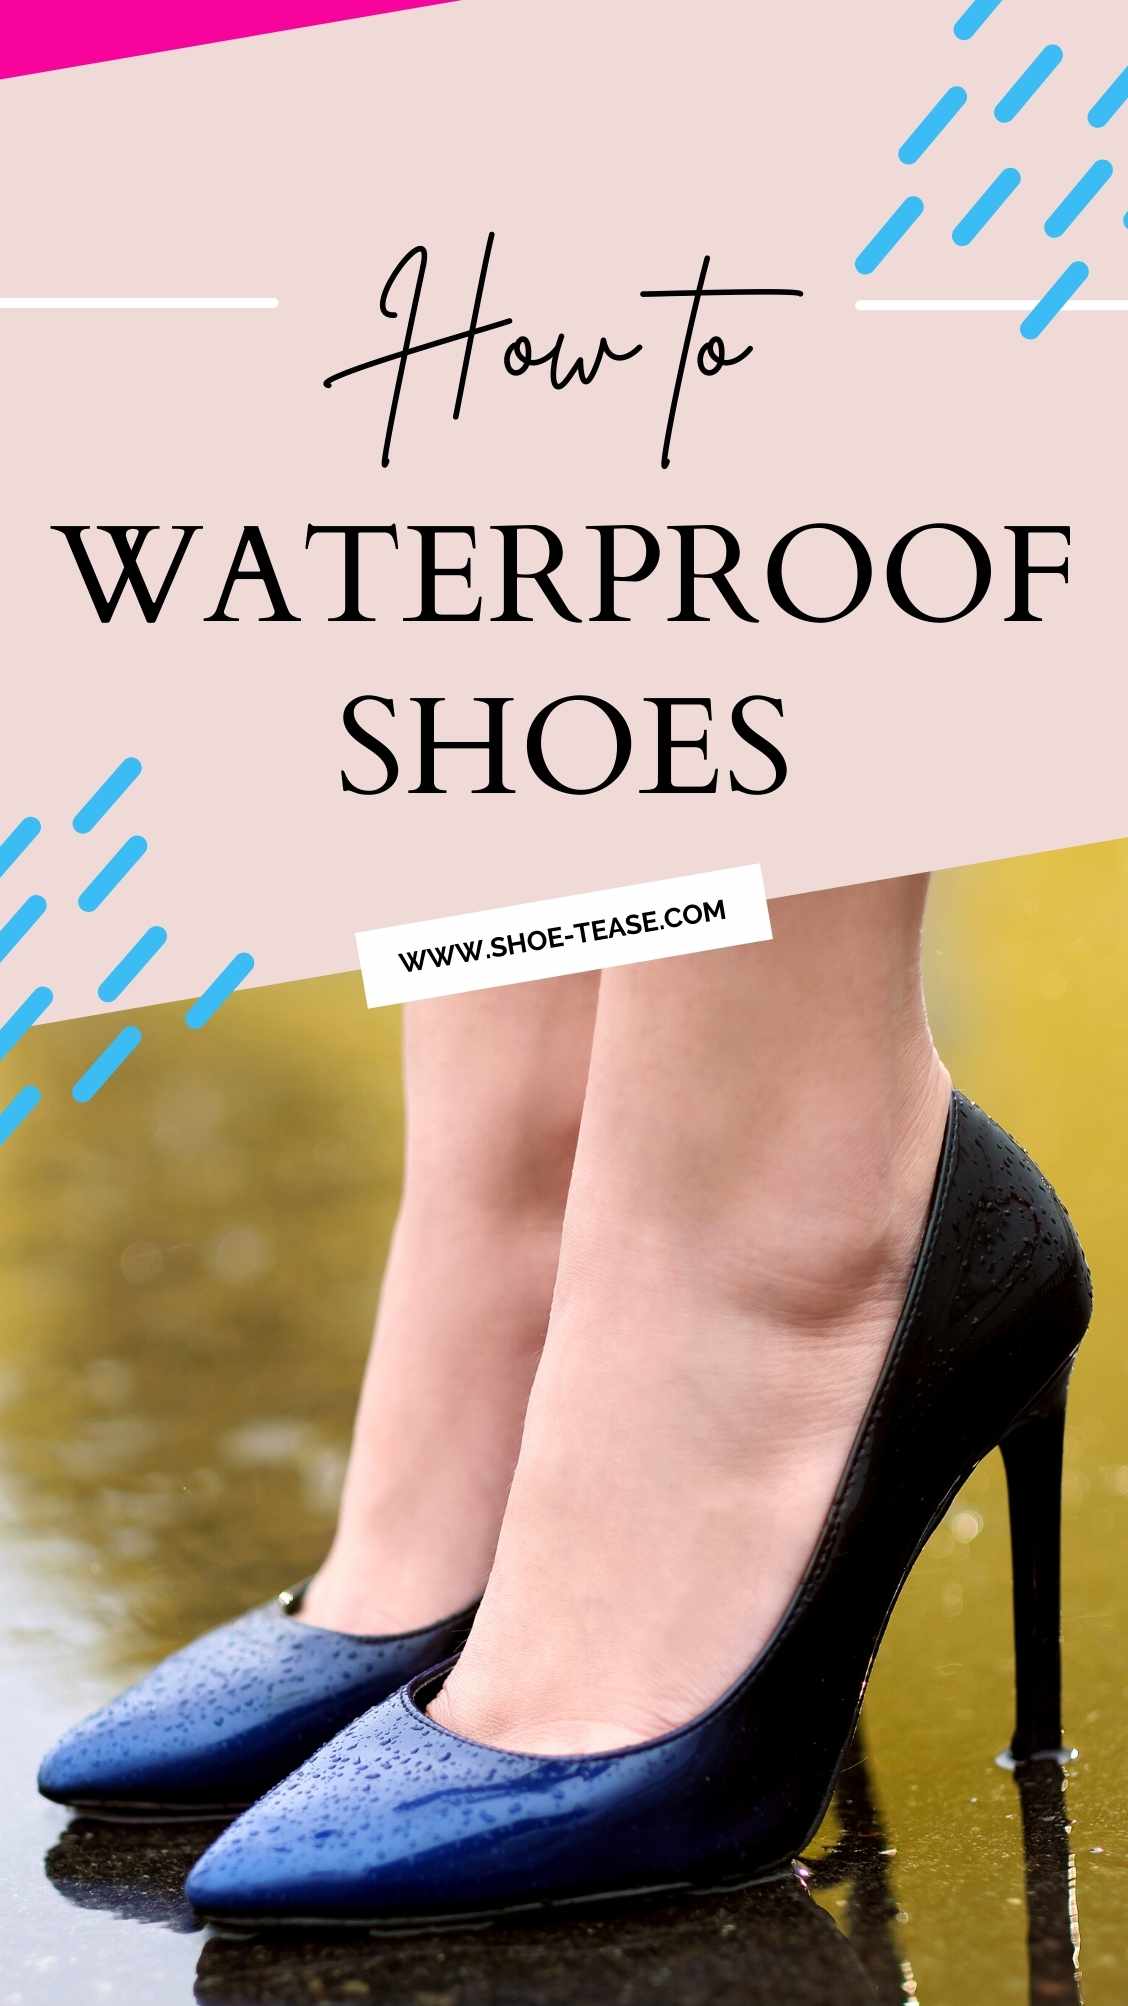 Text reading how to waterproof shoes ww.shoe-tease.com over collage of shapes and image of woman's feet wearing black stiletto pumps standing in on a wet surface.